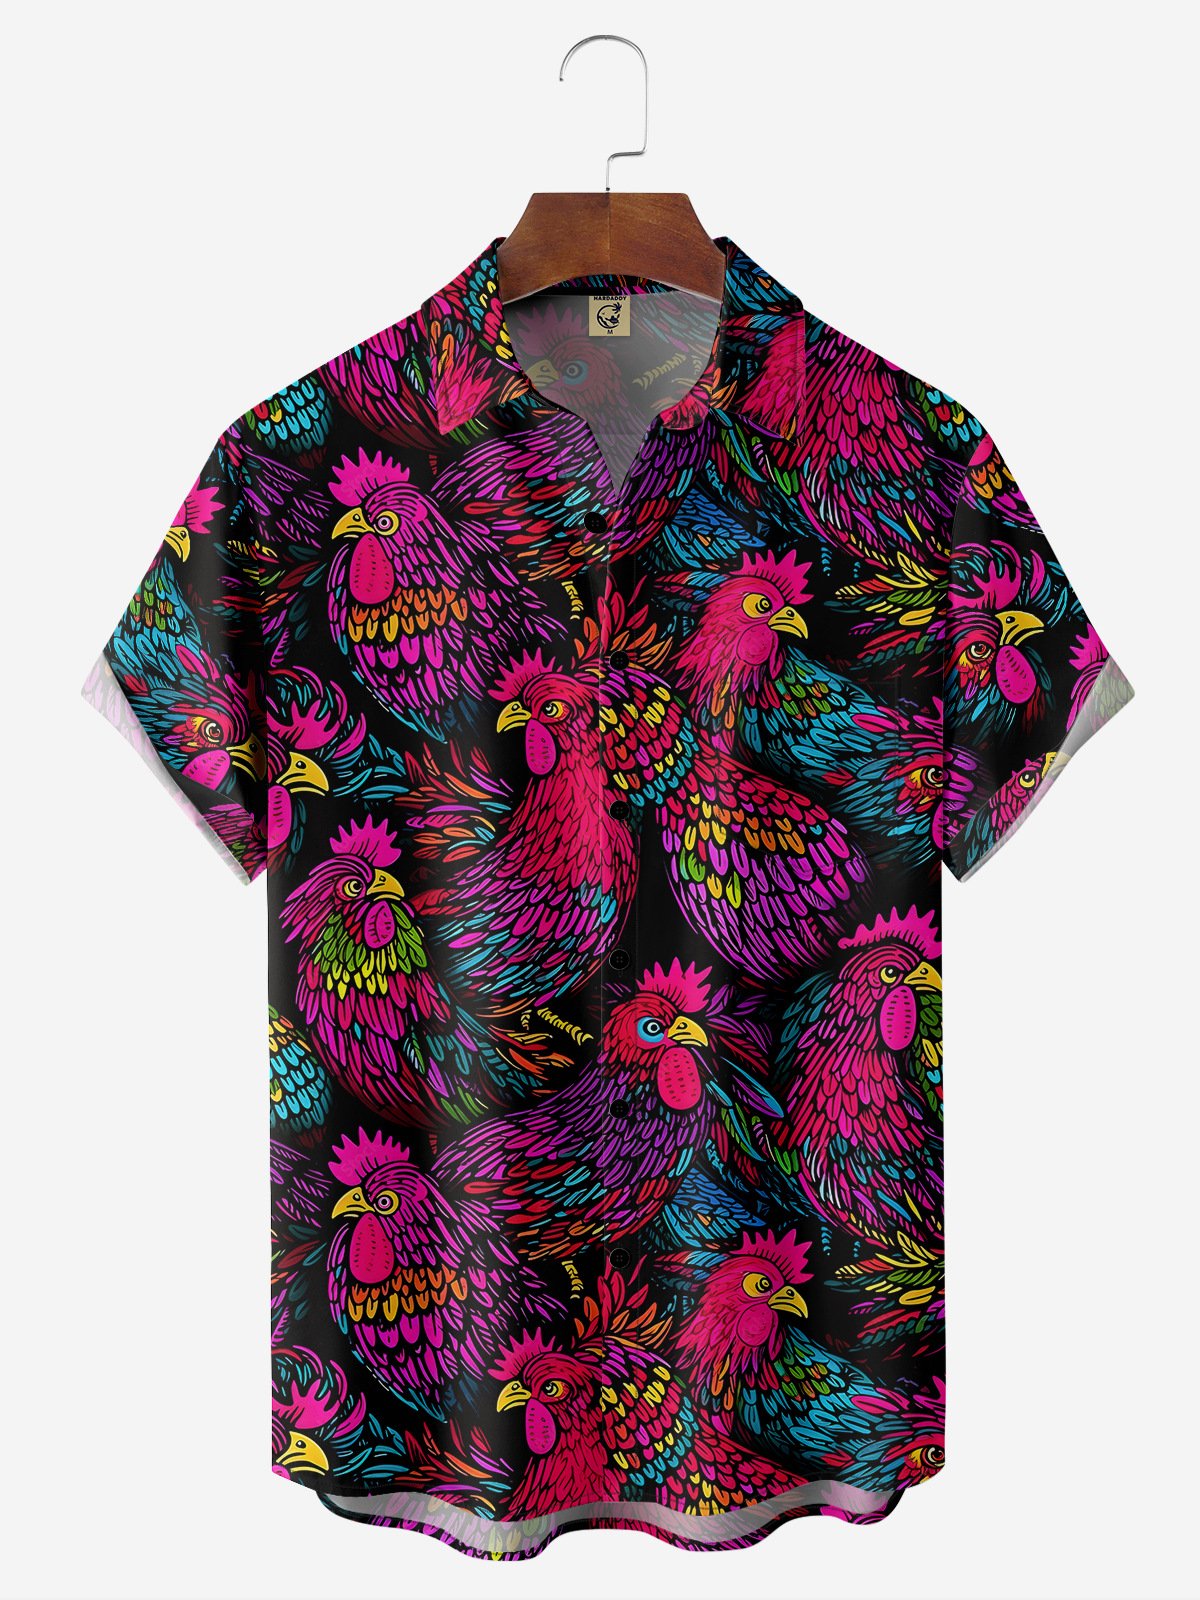 Hardaddy Rooster Art Painting Chest Pocket Short Sleeve Casual Shirt